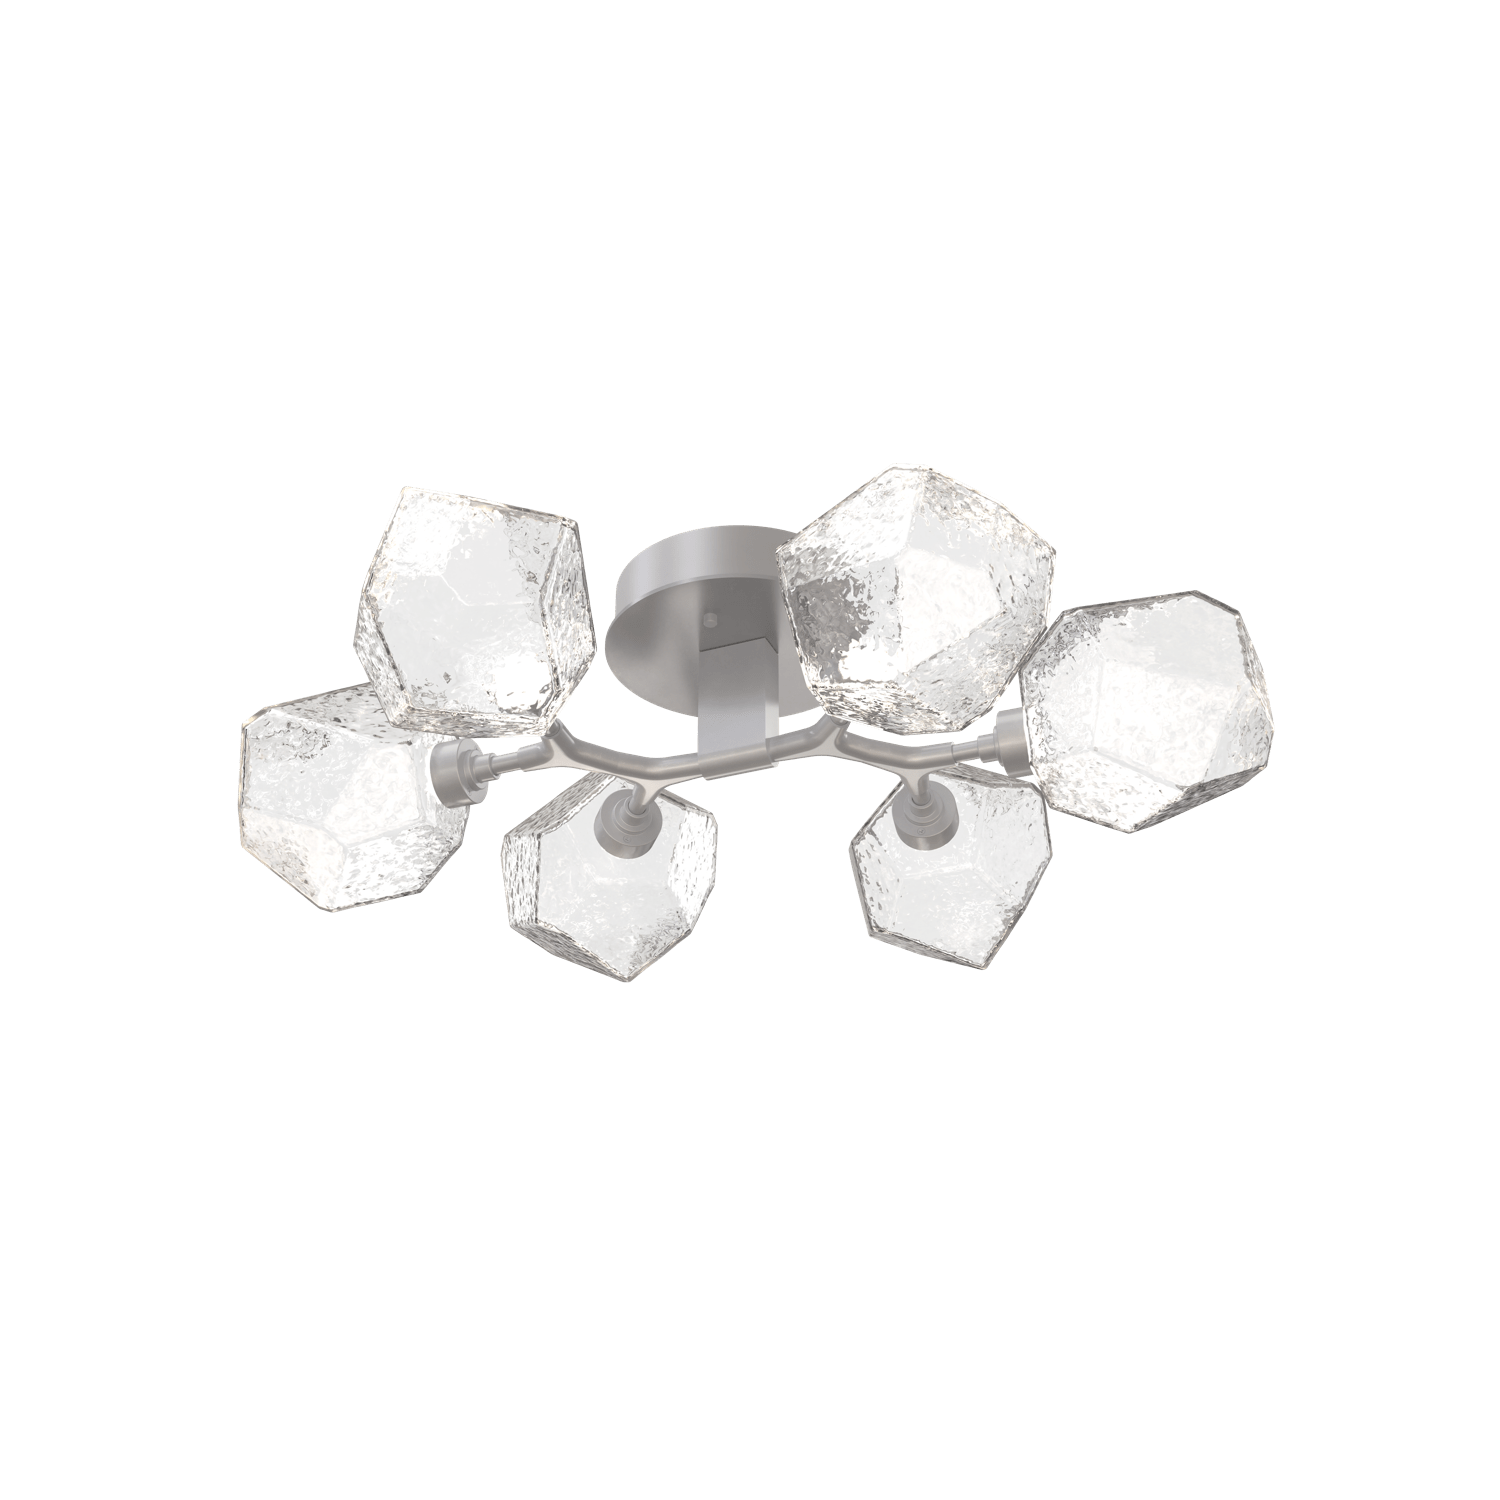 CLB0039-01-CS-C-Hammerton-Studio-Gem-6-light-organic-flush-mount-light-with-classic-silver-finish-and-clear-blown-glass-shades-and-LED-lamping